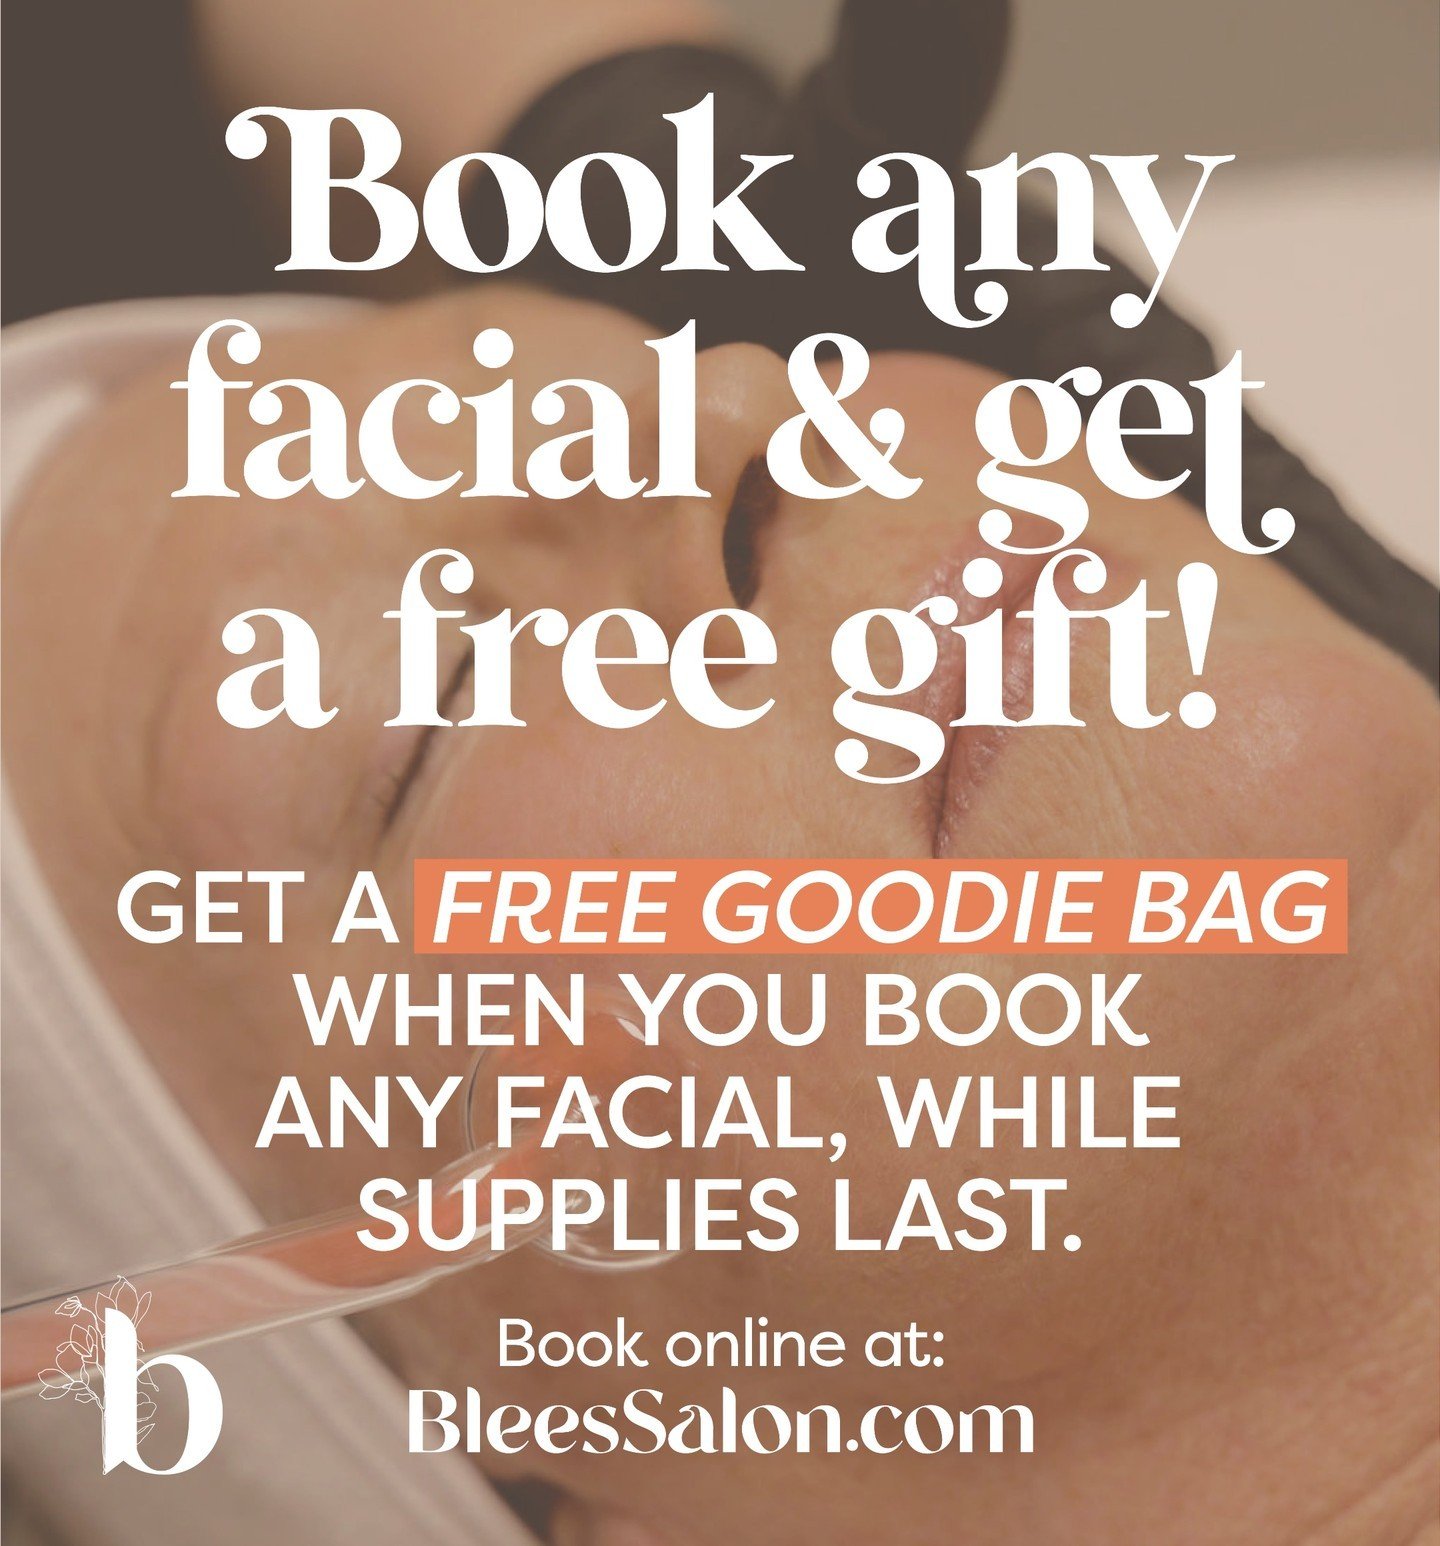 Book a facial &amp; receive a goodie bag on us! (While supplies last.) We have spots available this Saturday, call to schedule or book online. (518) 585-2557 www.BleesSalon.com 
#esthetician #aesthetician #aestheticianlife #licensedesthetician #skine